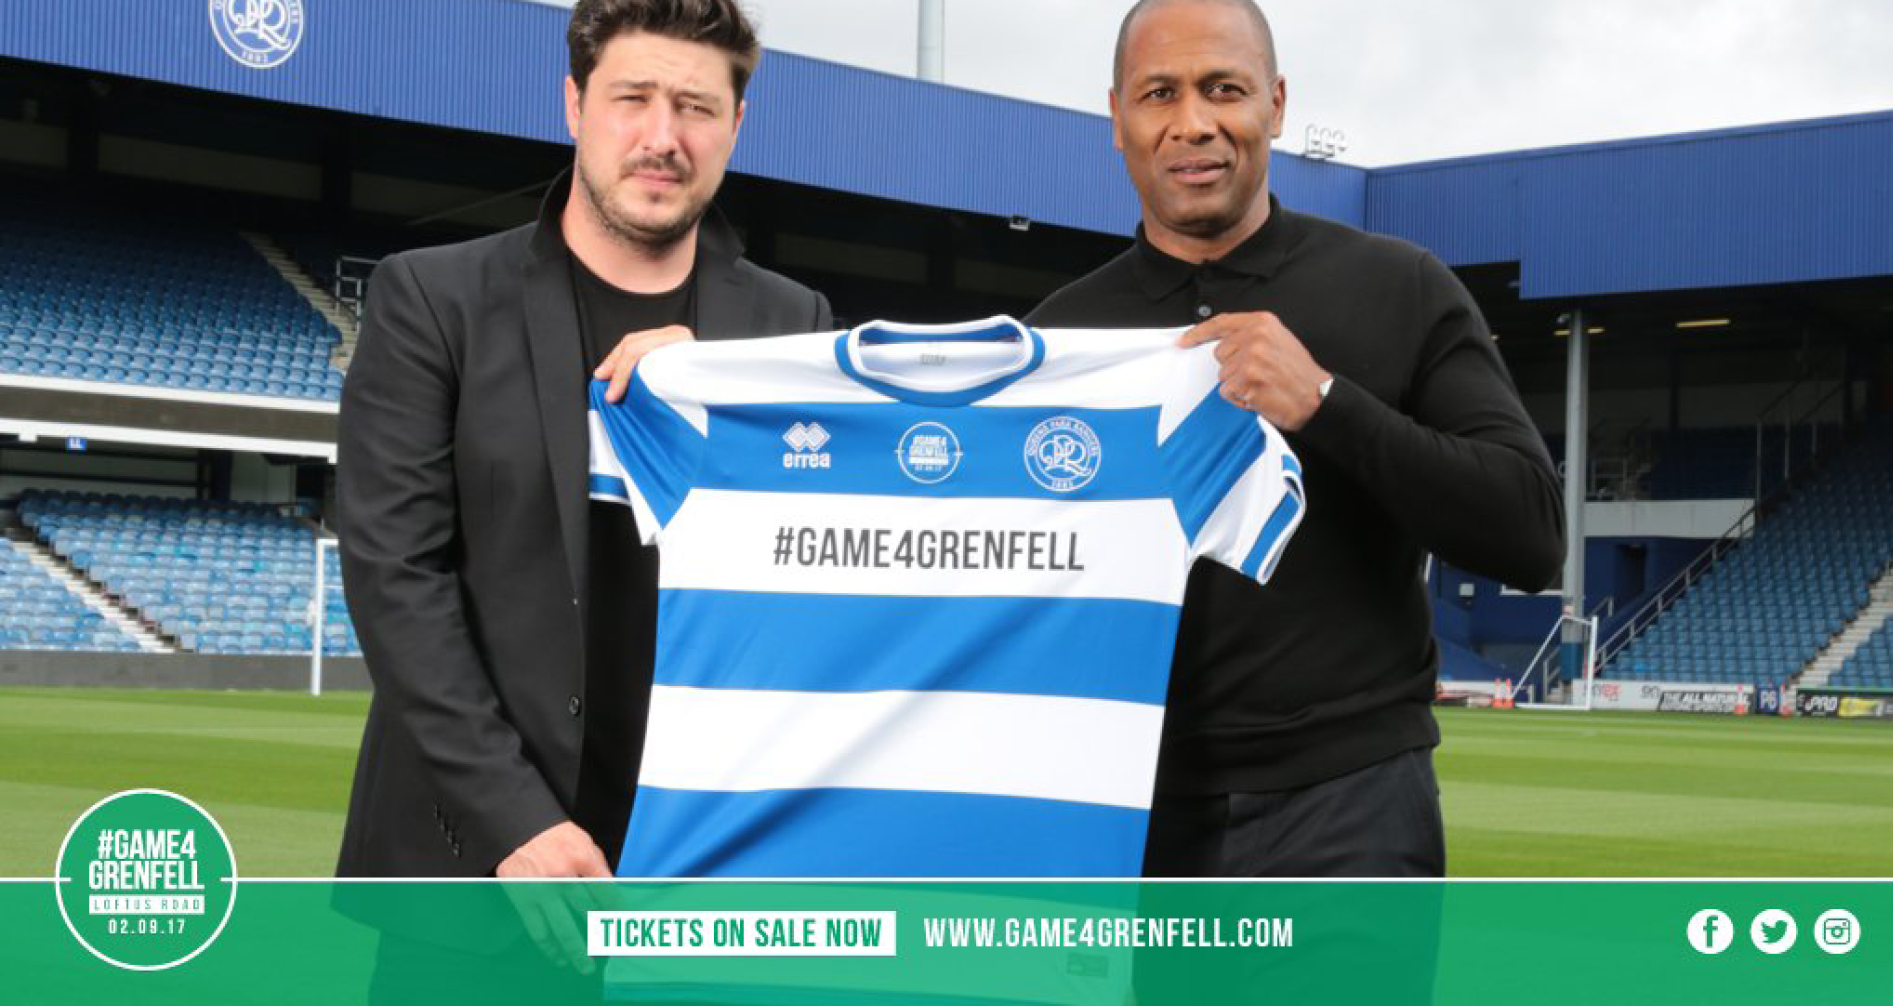 The Legends - Game4Grenfell